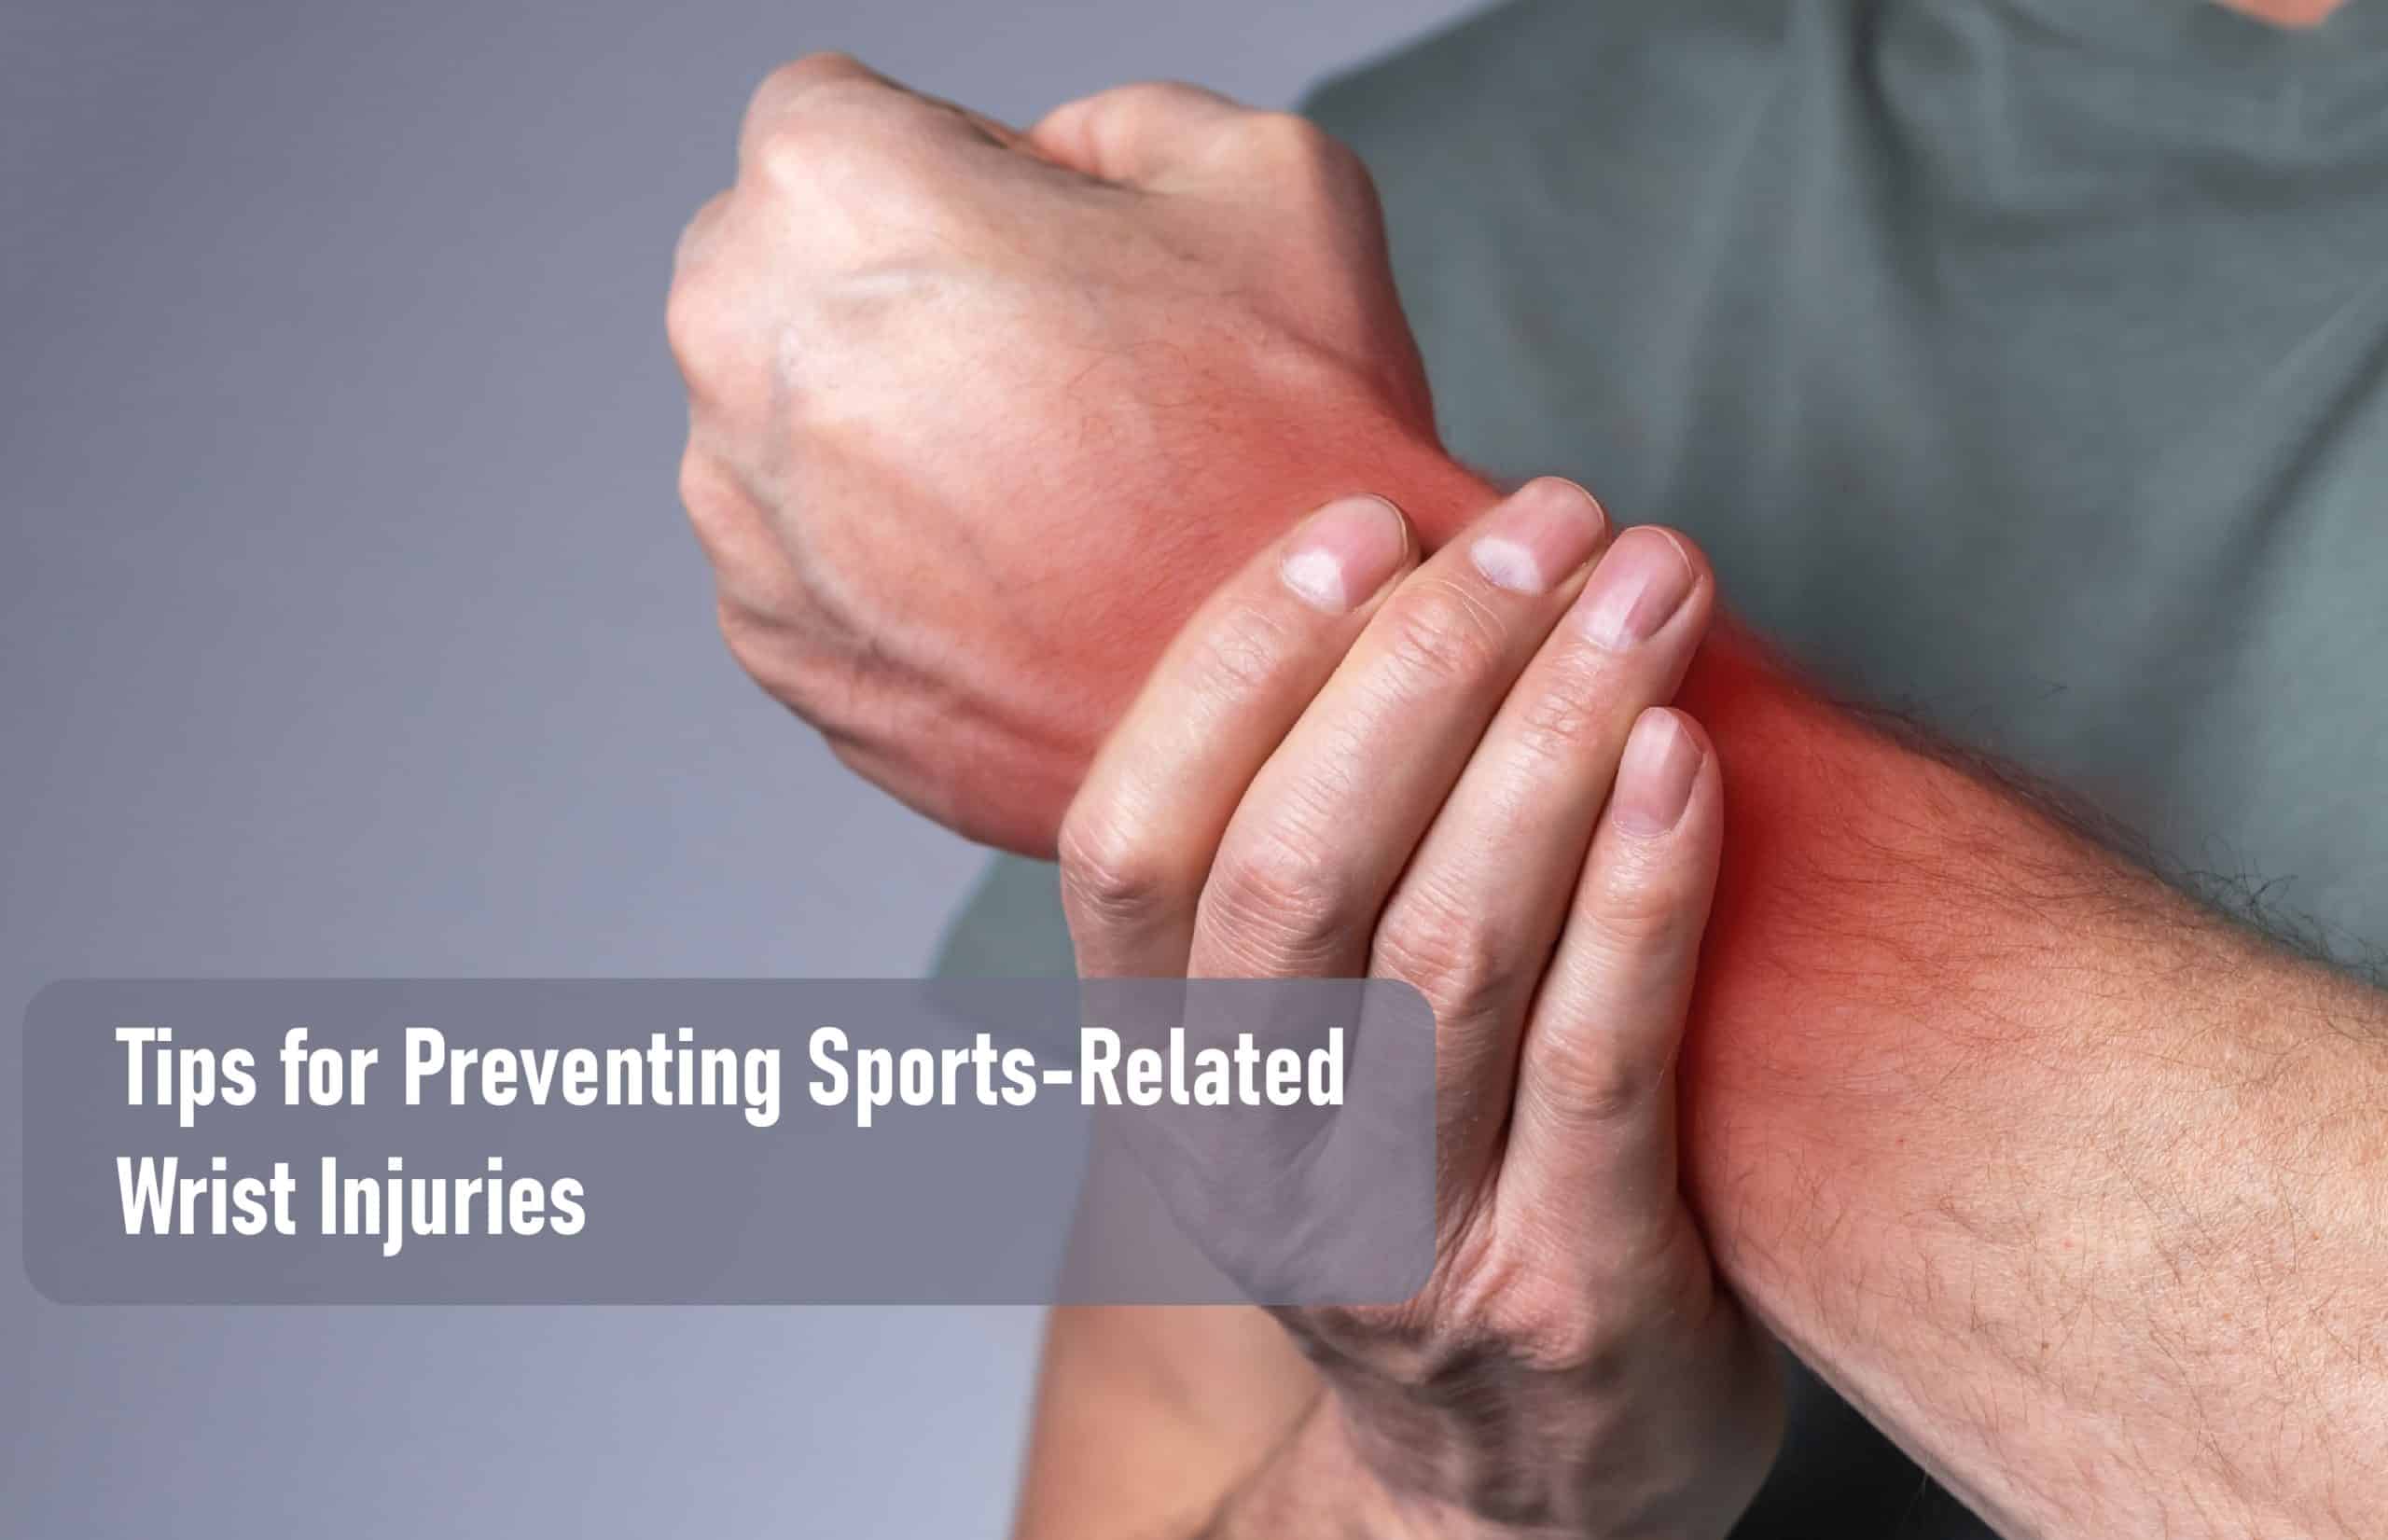 Tips for Preventing Sports-Related Wrist Injuries